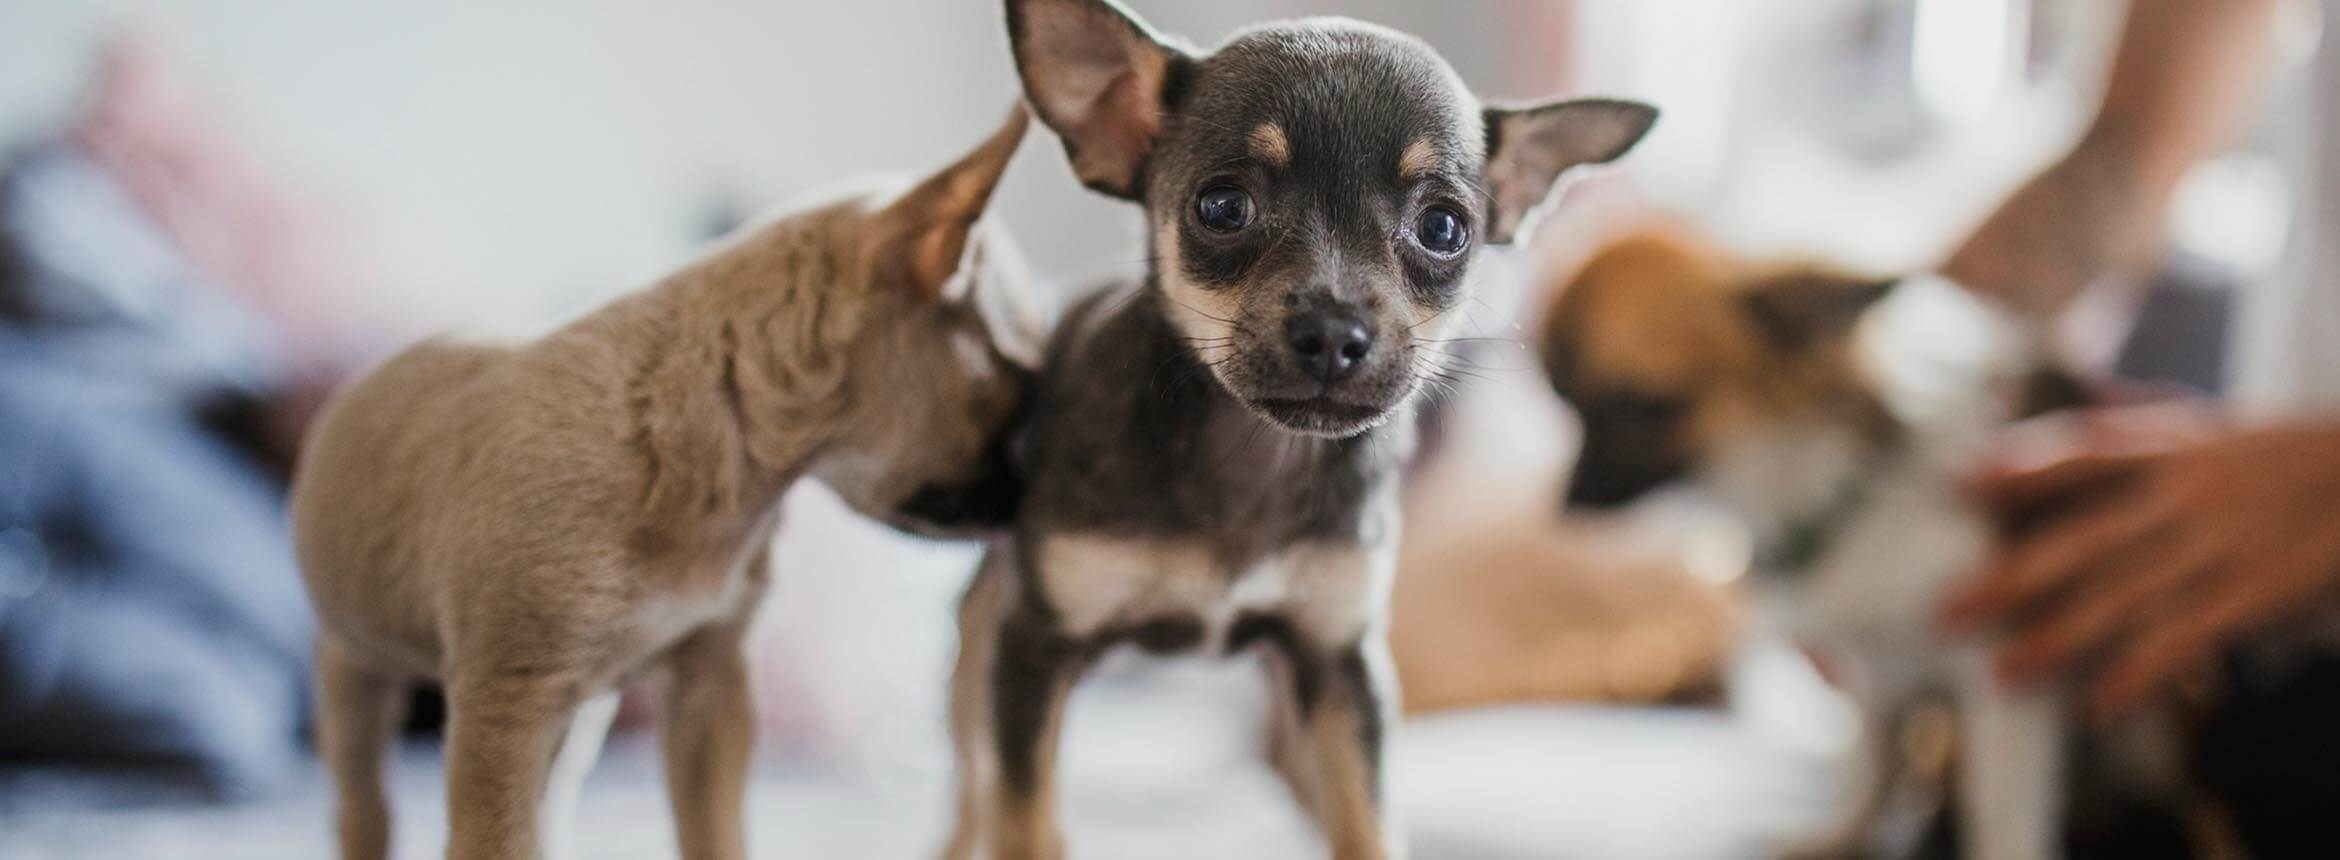 image of a chihuahua